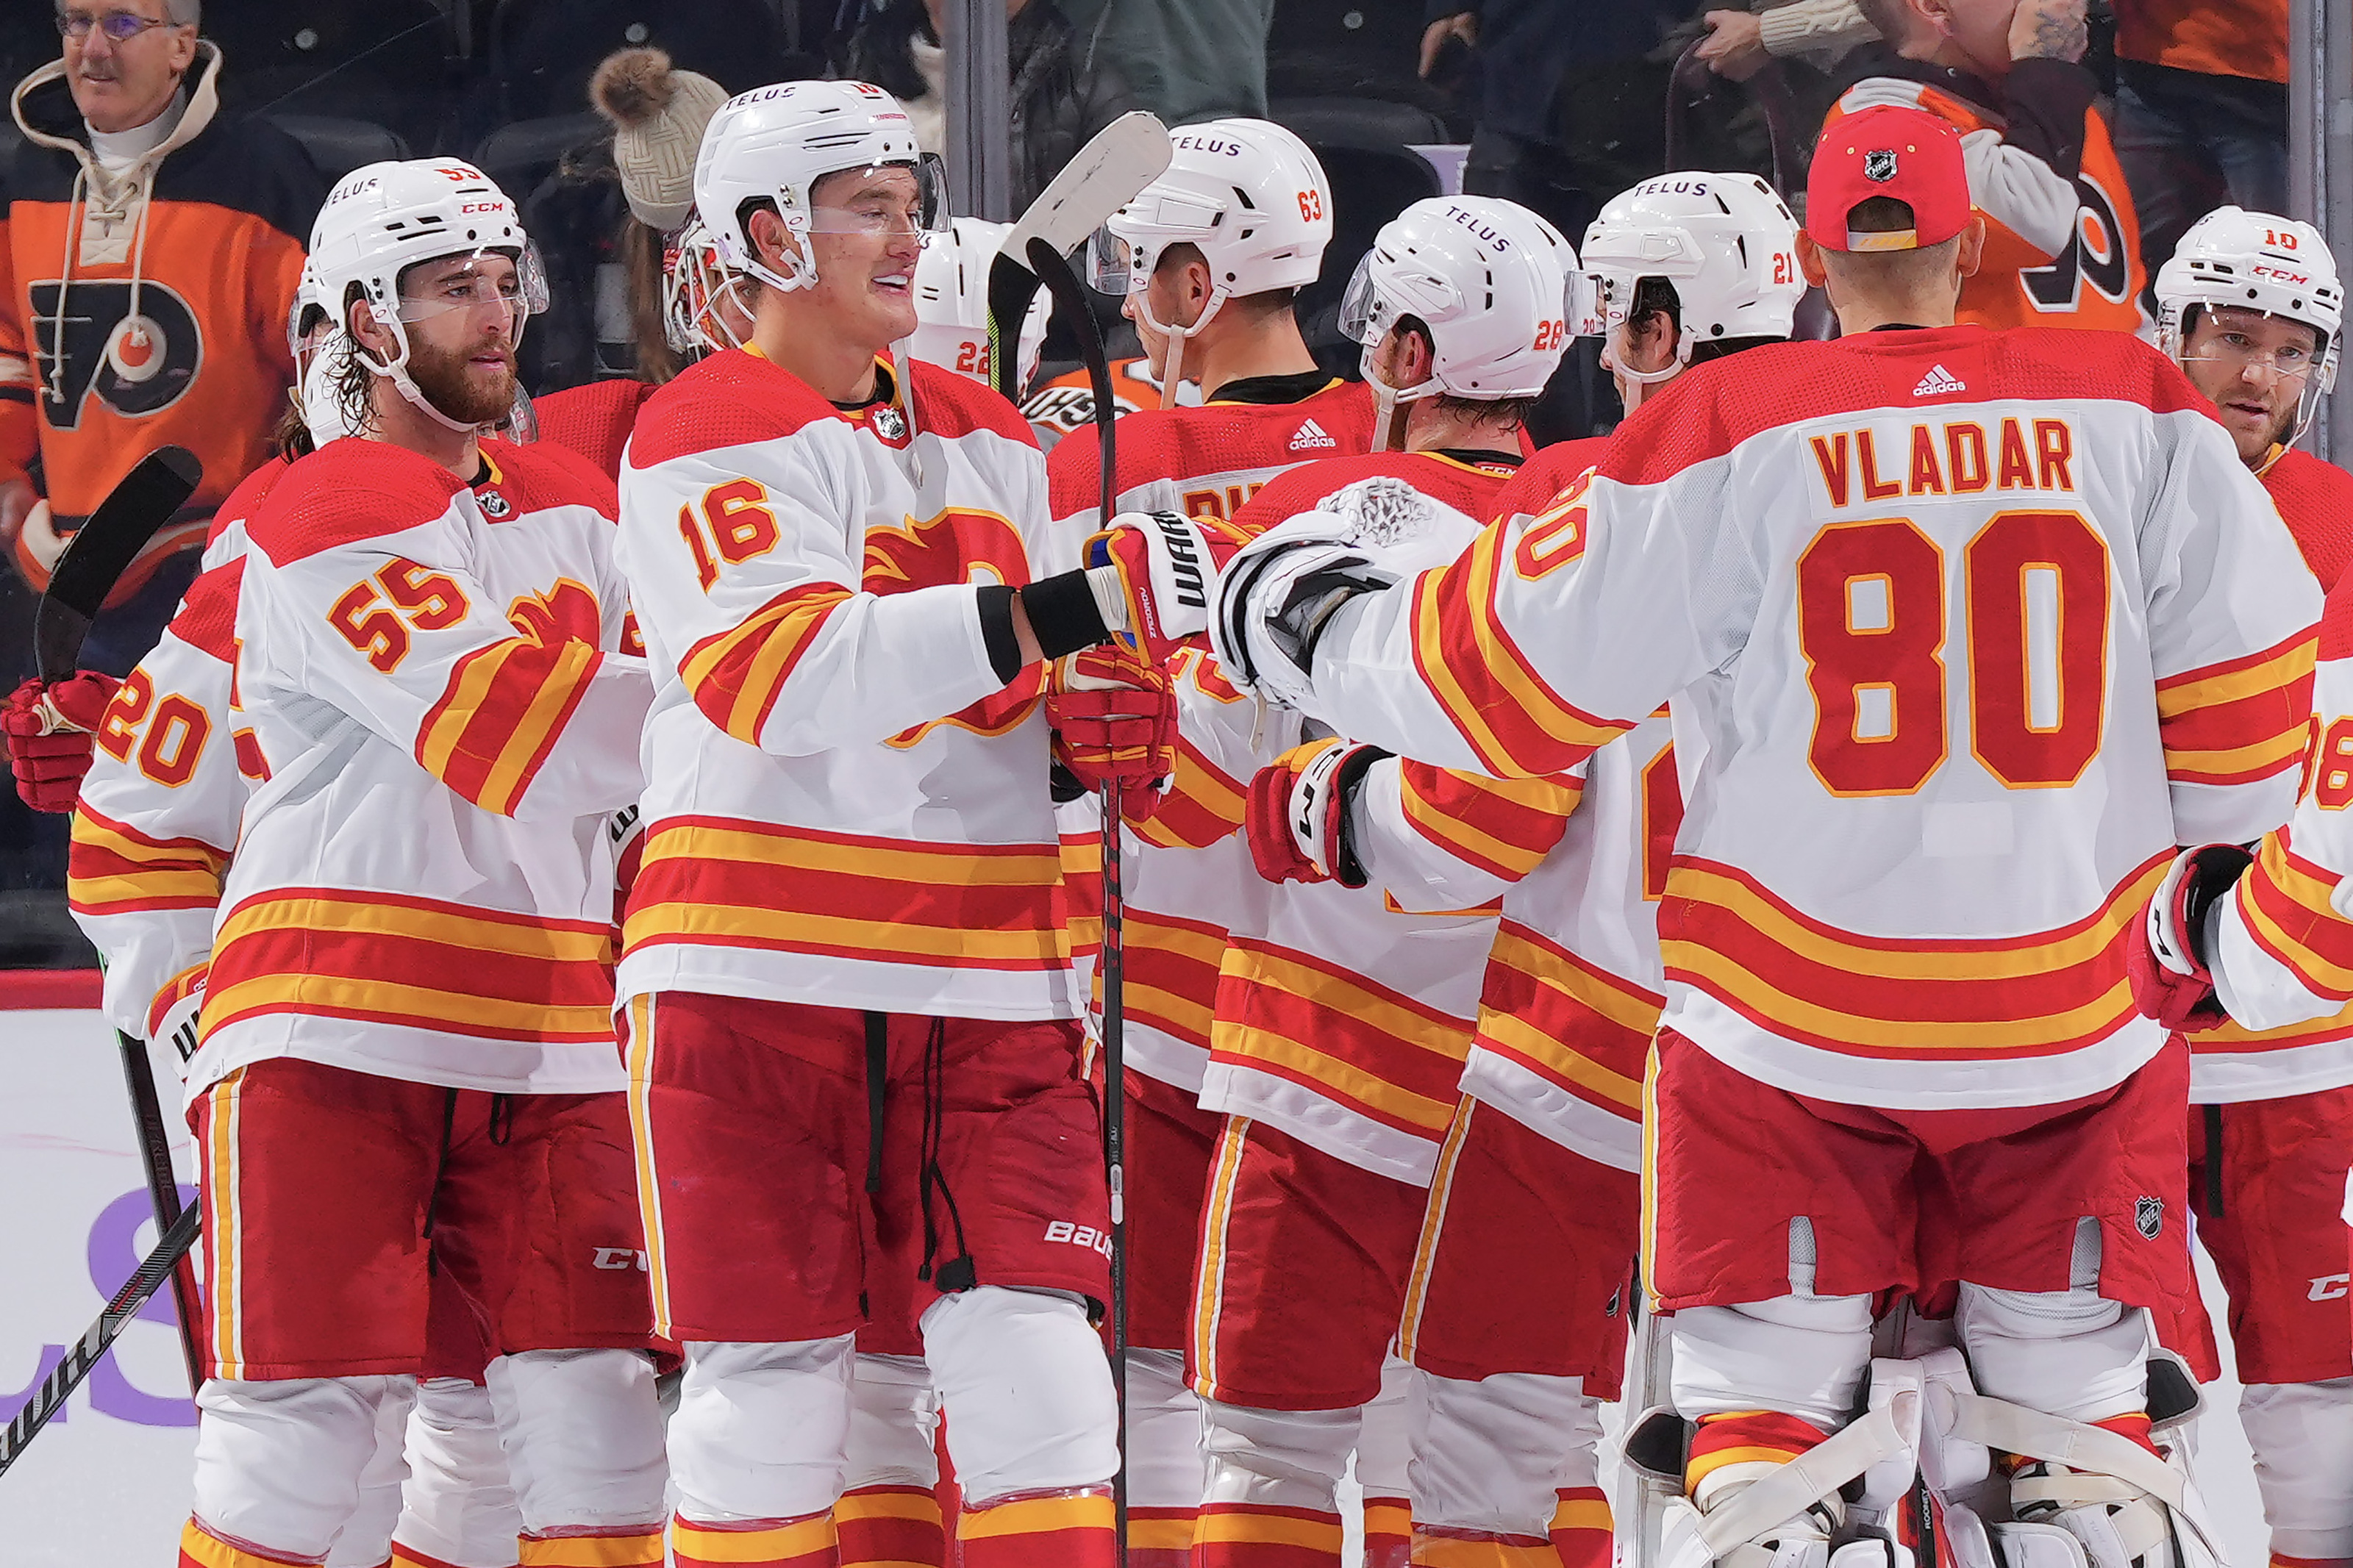 Calgary Flames - Calgary Flames updated their cover photo.